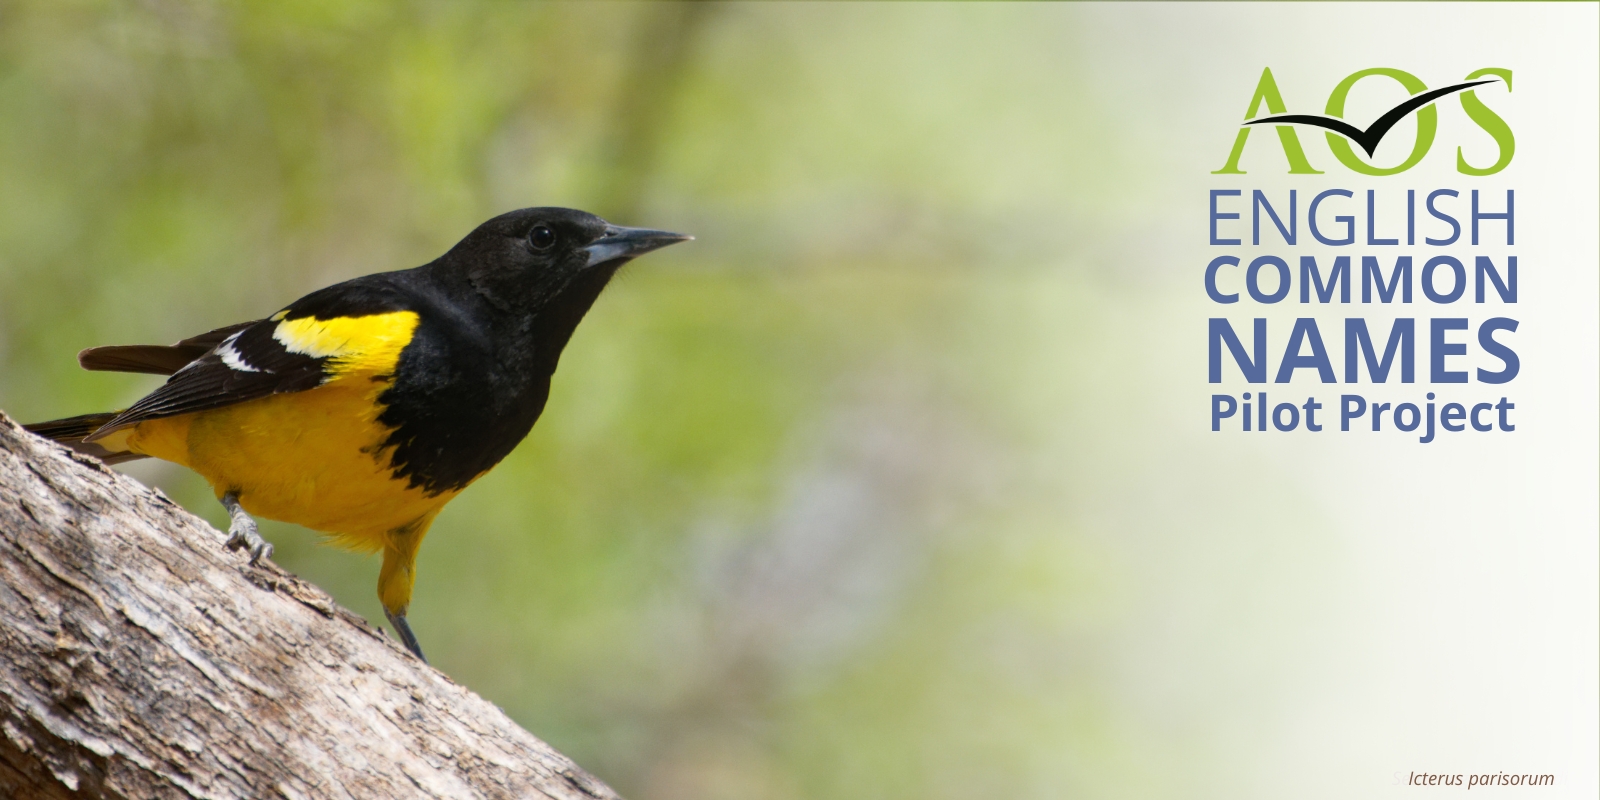 Scott’s Oriole Icterus parisorum on a tree trunk with AOS English Common Names Pilot Project wording on right